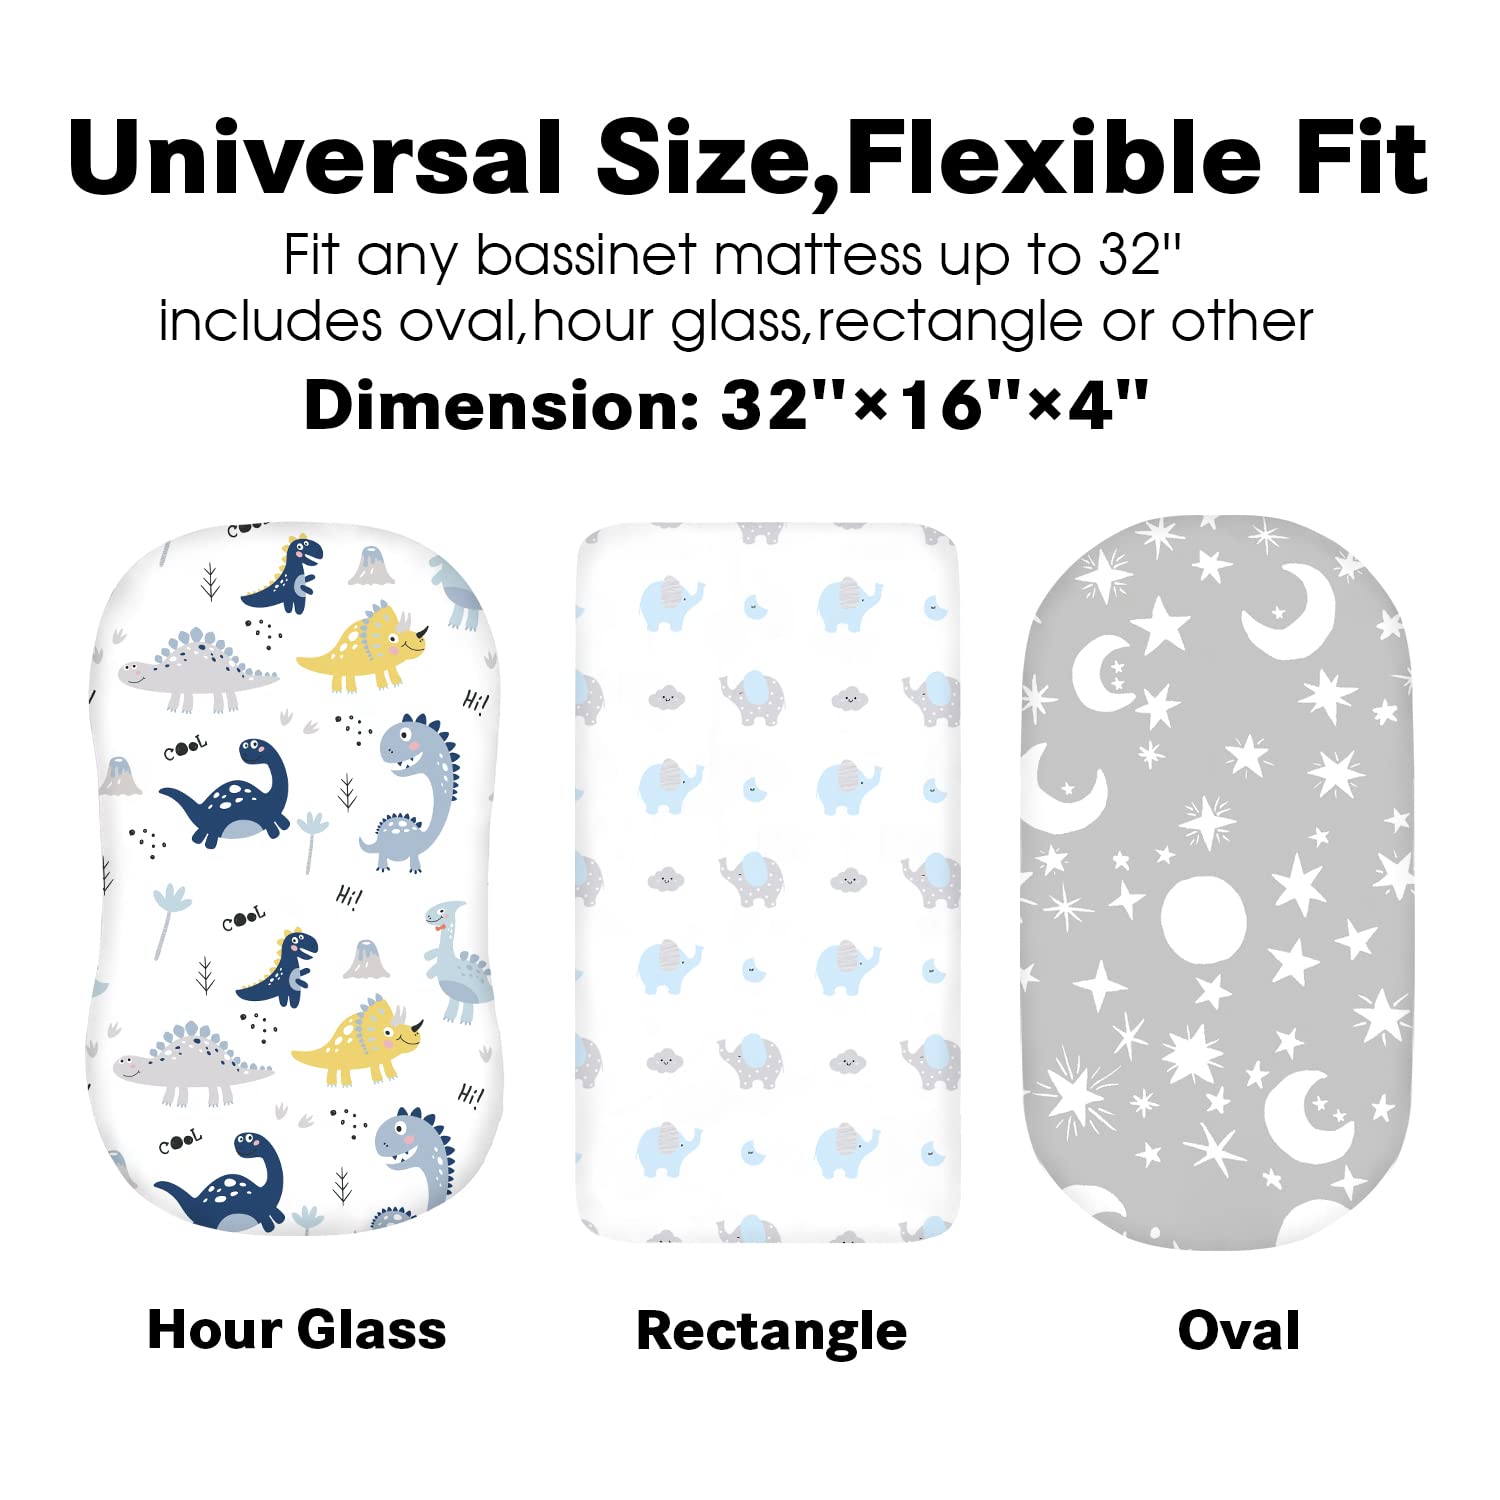 Plushii Bassinet Sheets for Baby Boys 3 Pack, 32"x 16" Extra Soft Microfiber Bassinet Sheet Universal for Oval Rectangle and Hourglass Bassinet Mattress, Dinosaur & Blue Elephant & Stars